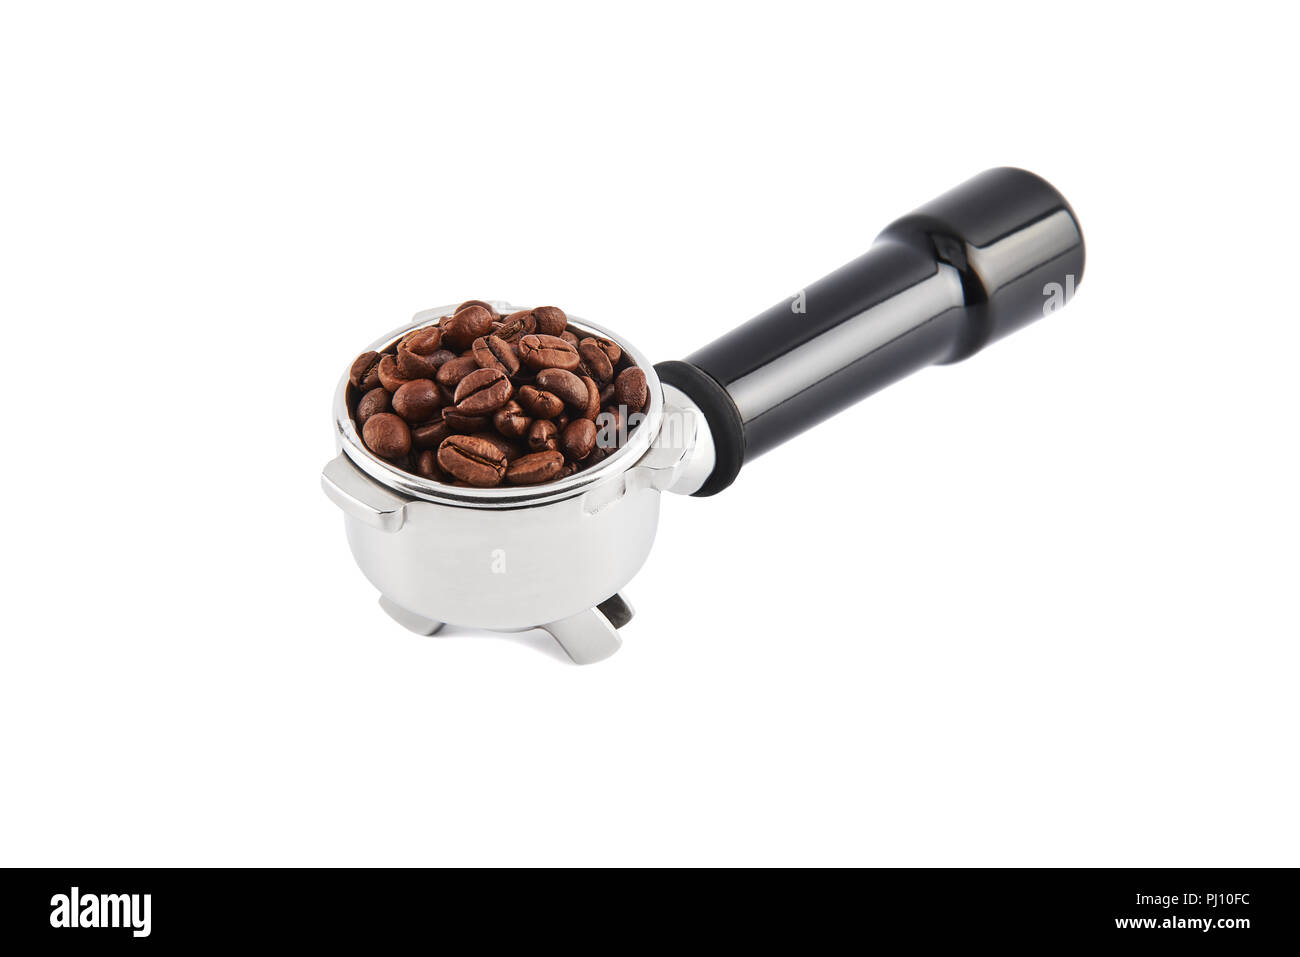 Portafilter filled with whole coffee beans isolated on white background. Filter holder for espresso coffee machine. Black Espresso handle. Stock Photo